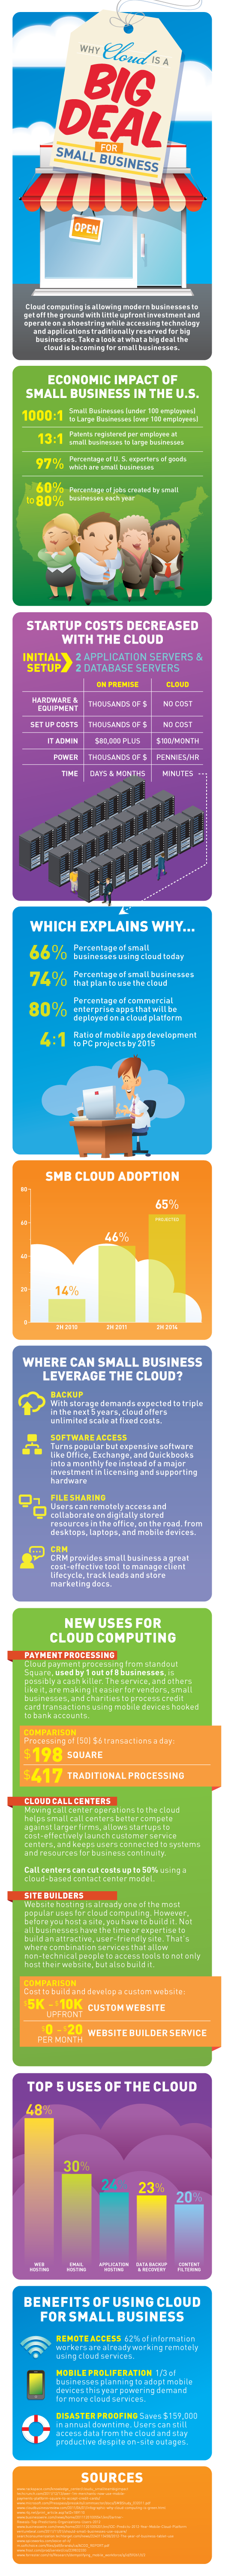 Rackspace® — [INFOGRAPHIC] Hosting to Storage: Why the Cloud is a Big Deal for Small Businesses